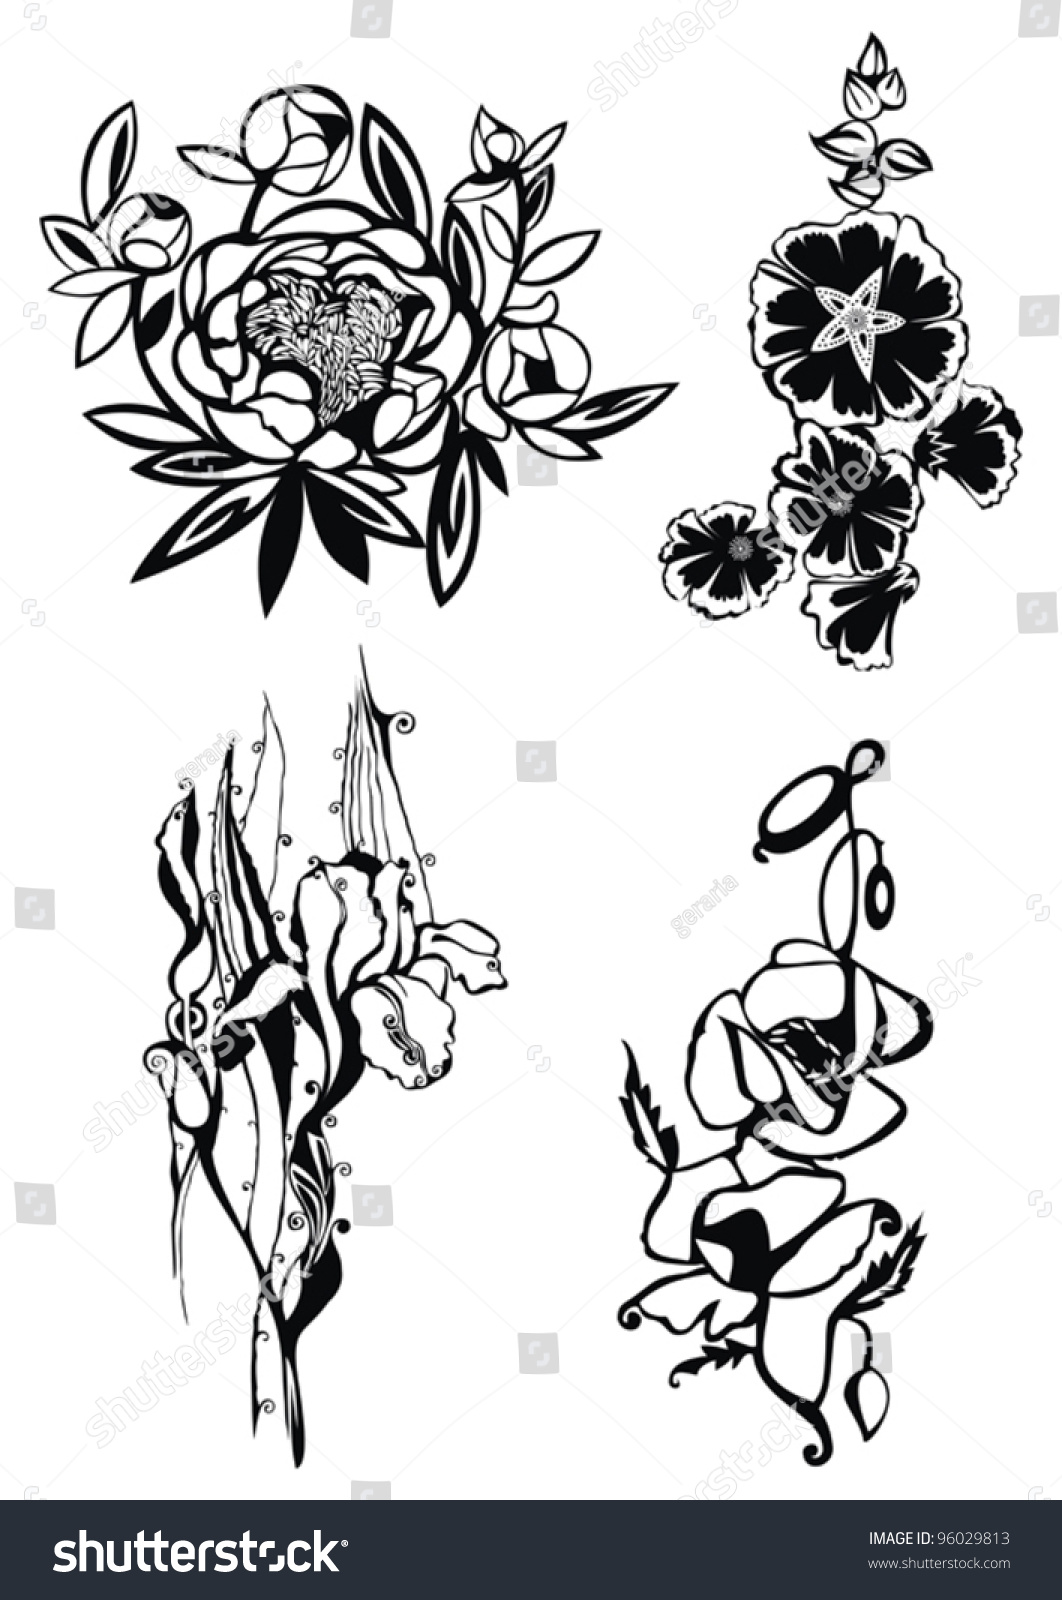 Vector Set With Decorative Flowers With Ornamental Elements, Artistic